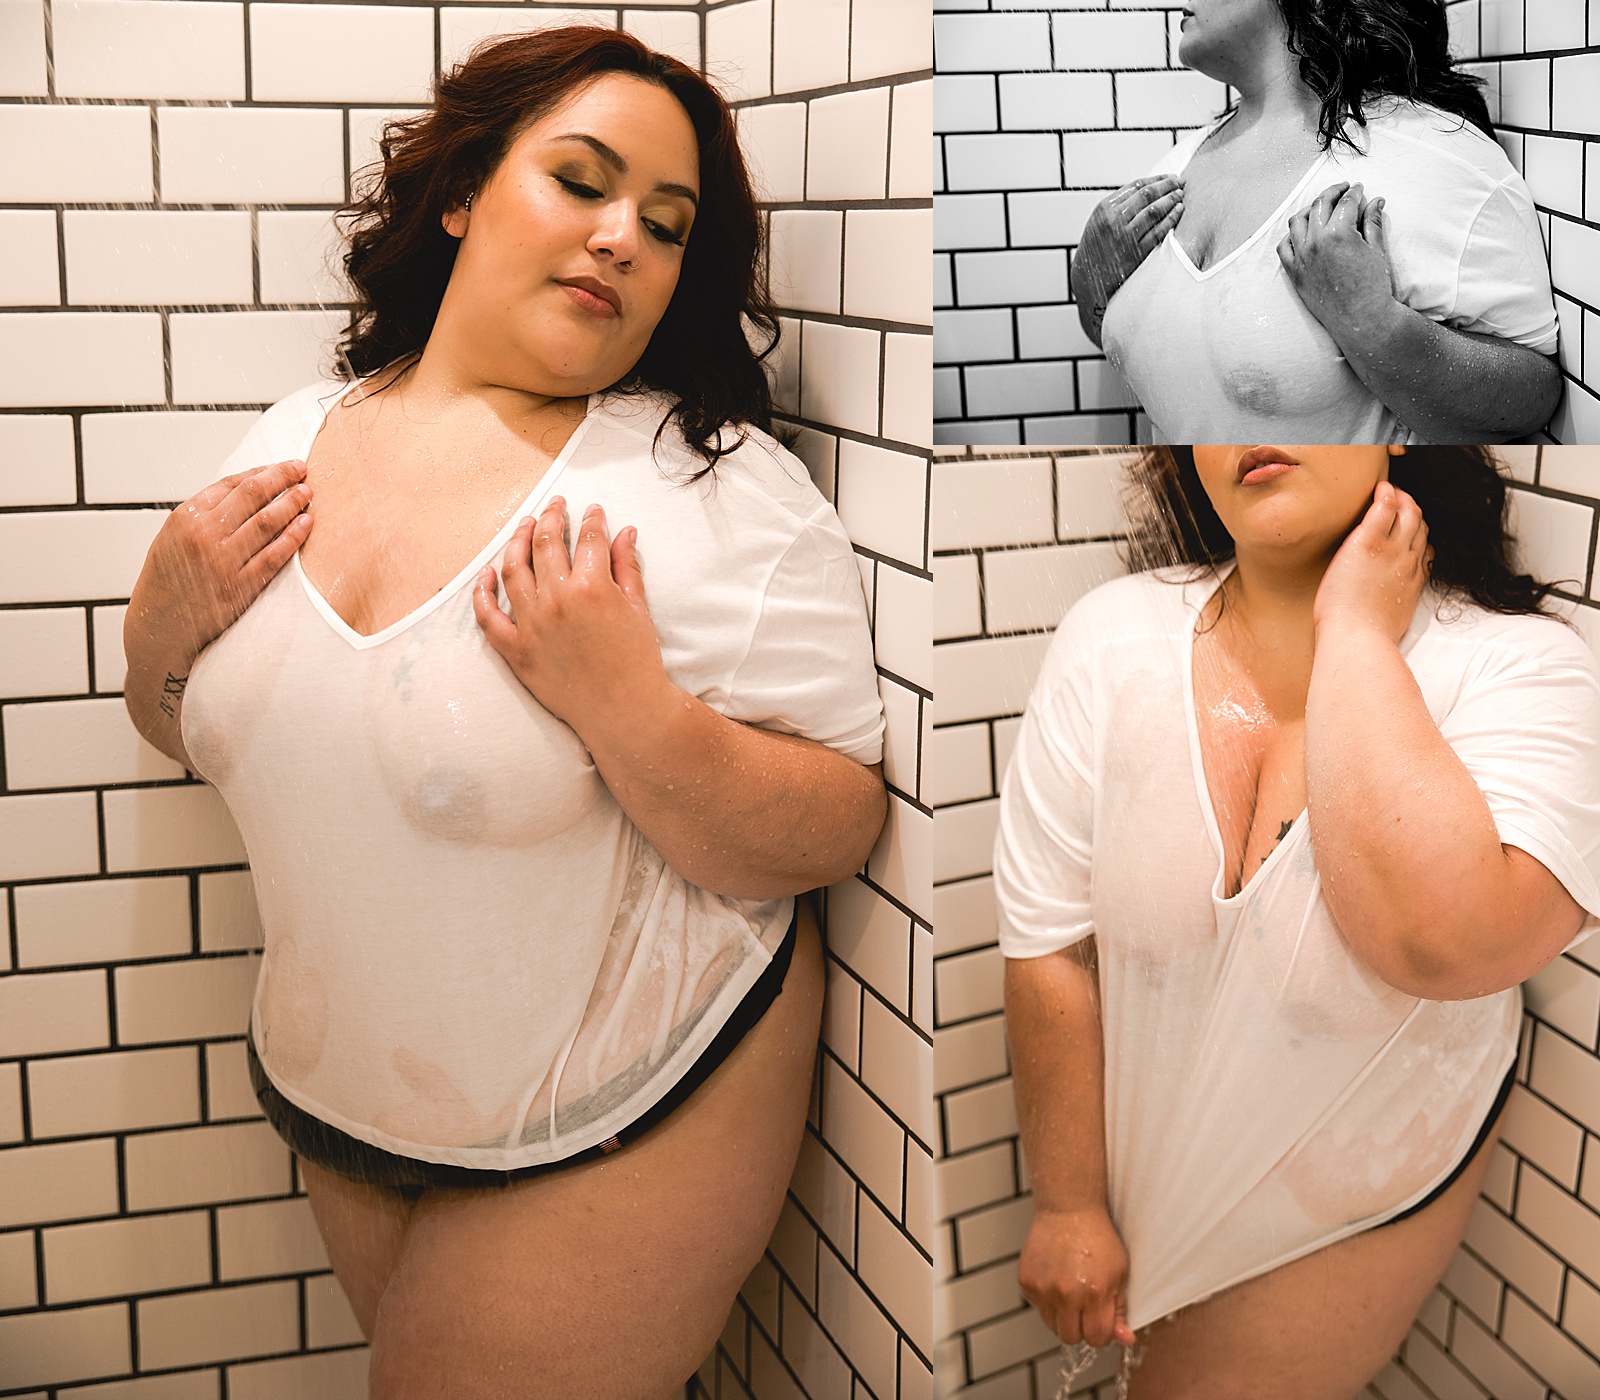 White T-shirt in shower with black lace thong for empowering photo shoot